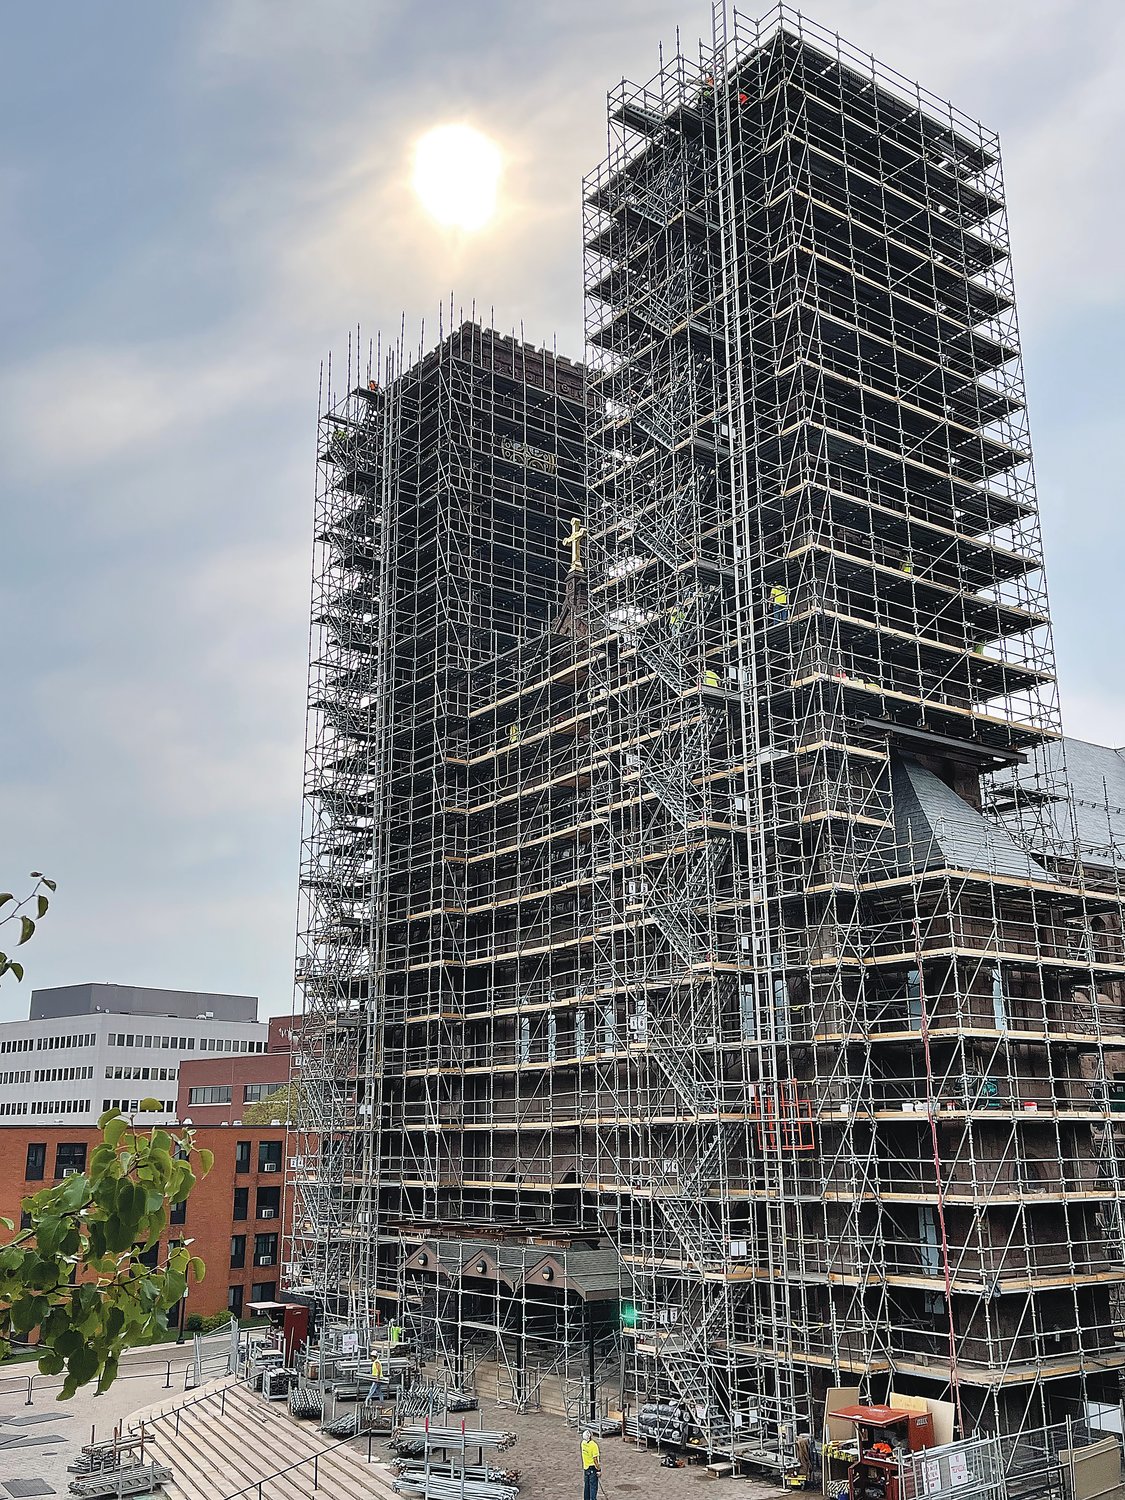 scaffolding is installed around the Cathedral of SS. Peter in Paul in June 2021, four months after the cathedral’s roof was replaced and work to restore the integrity of the towers was about to begin on the historic building, consecrated in 1889.